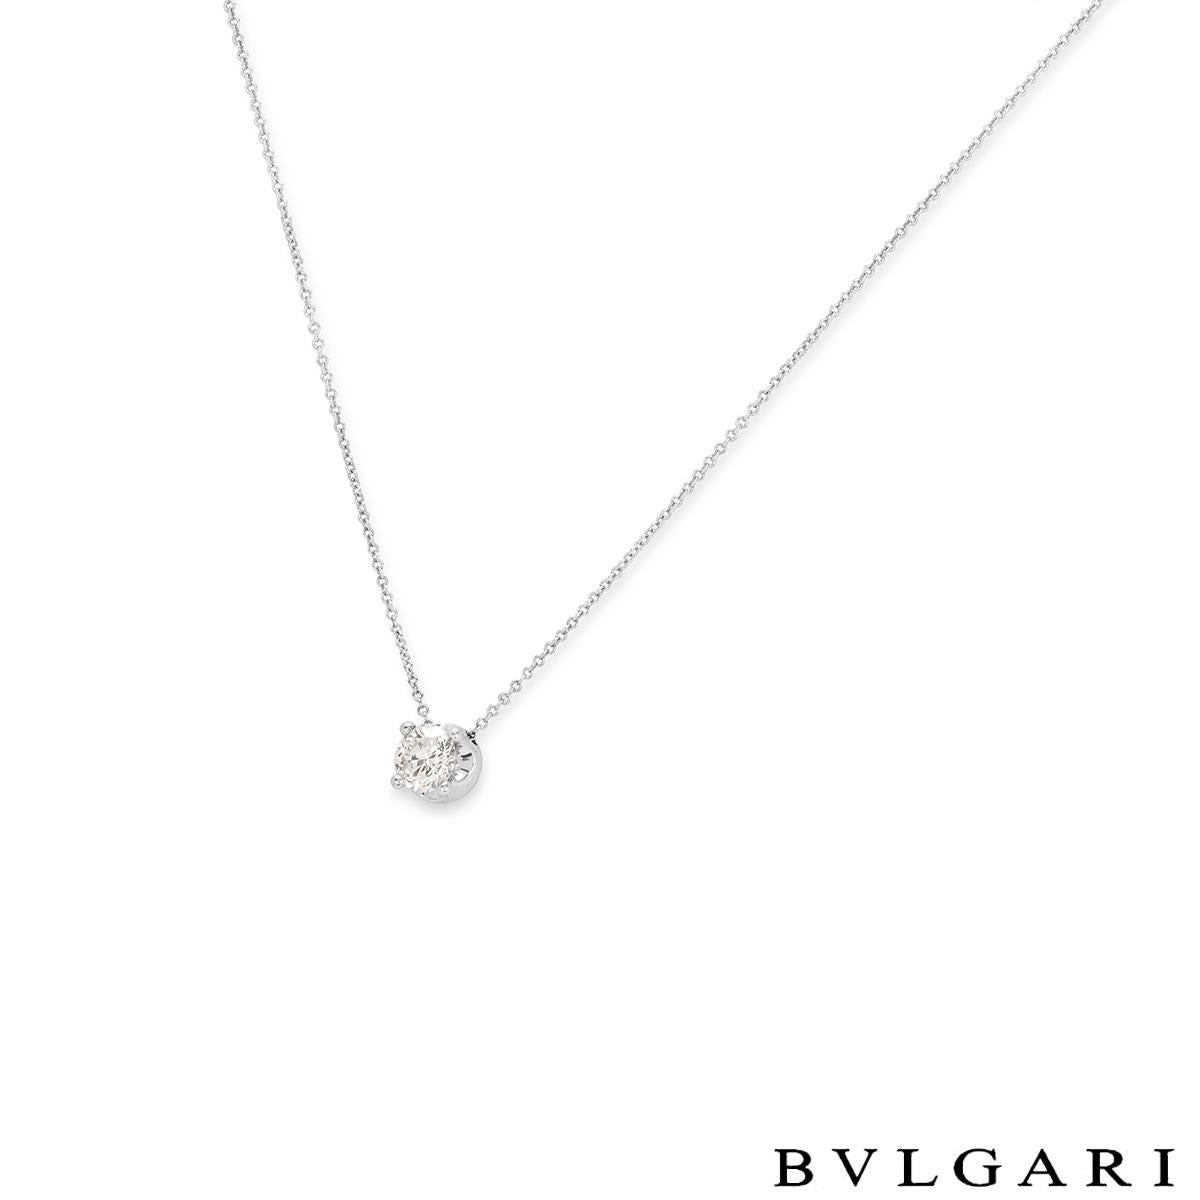 A stunning 18k white gold Bvlgari diamond necklace from the corona collection. The necklace comprises of a round brilliant cut diamond in a raised four claw setting, with a weight of 1.02ct, H colour and IF clarity. The diamond scores an excellent